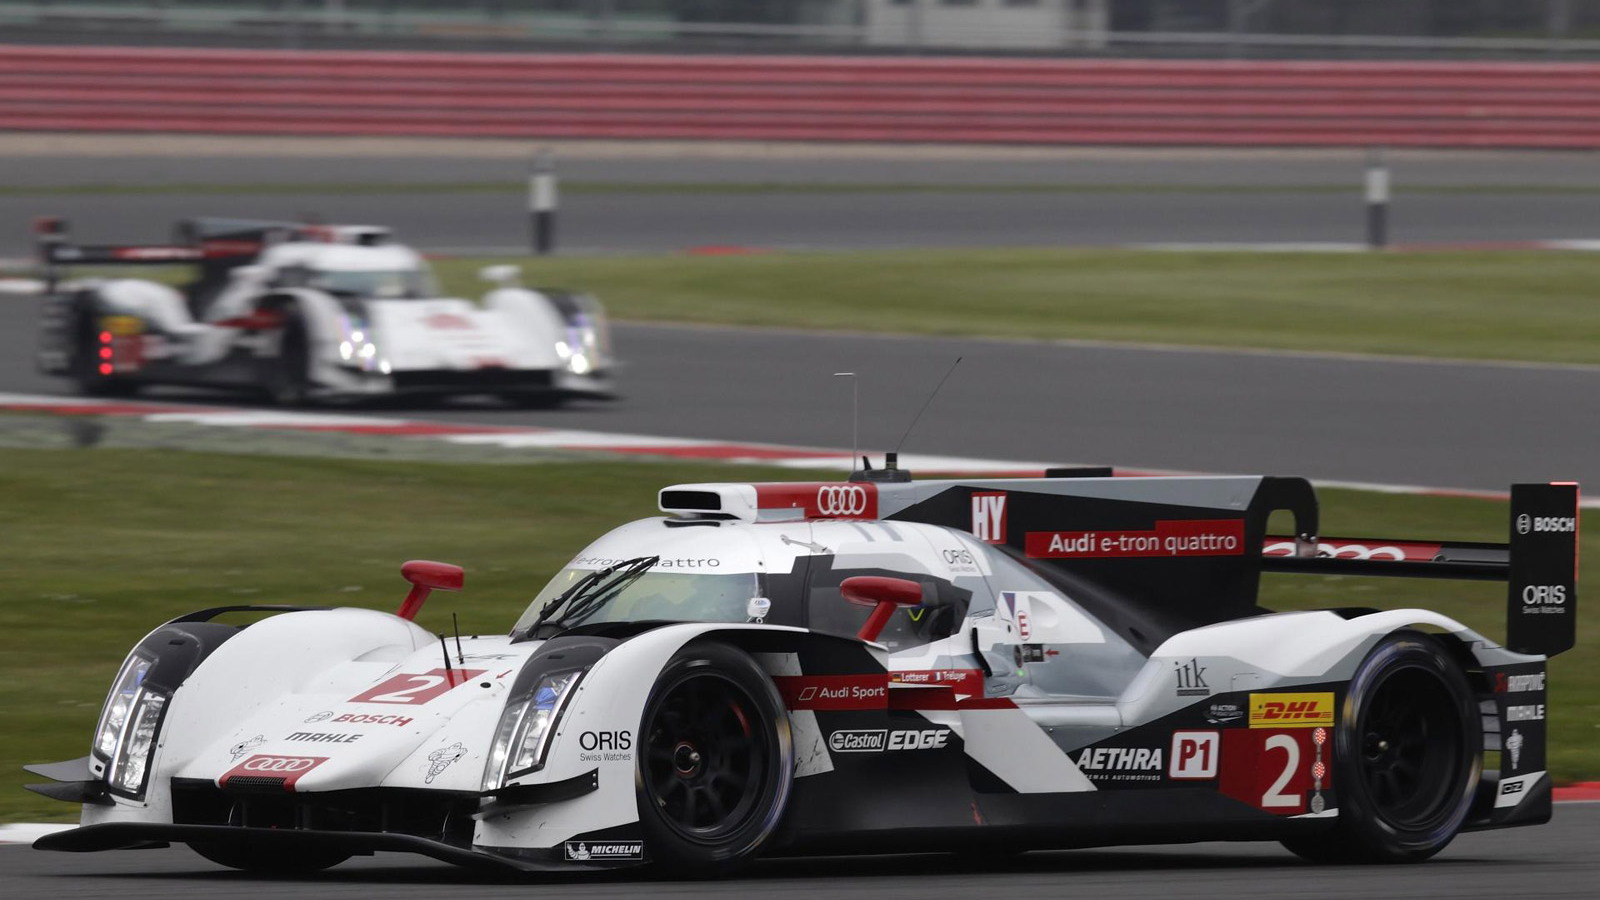 LMP1 cars in the 2014 6 Hours of Silverstone